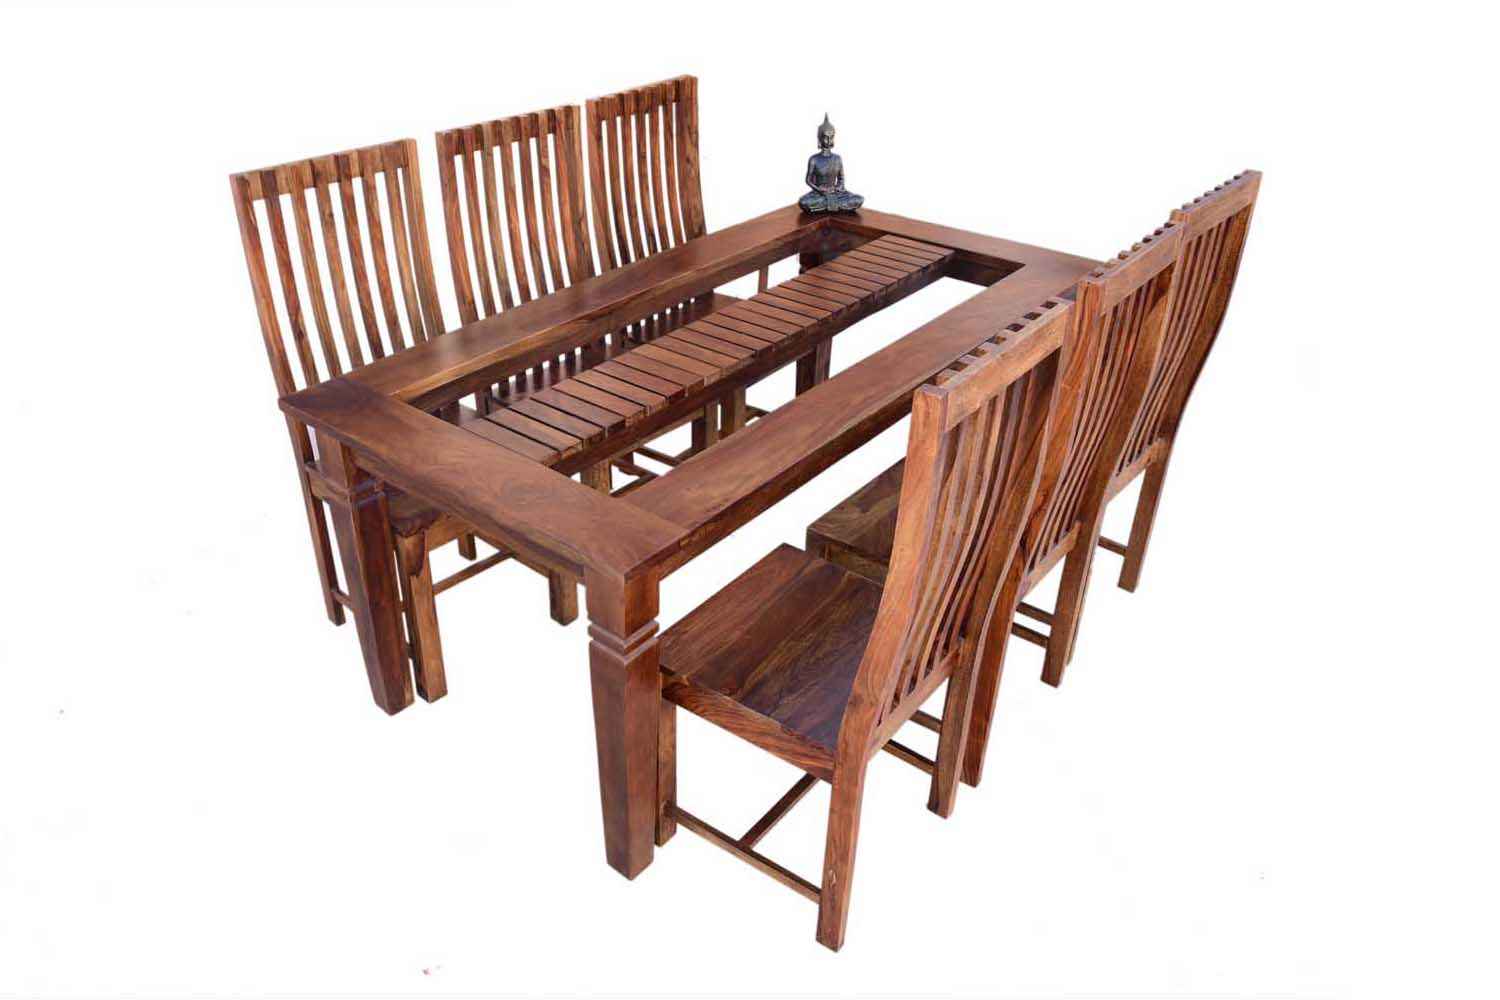 Buy 8 Seater swingo dining table with zernal wooden chair | Dining Room